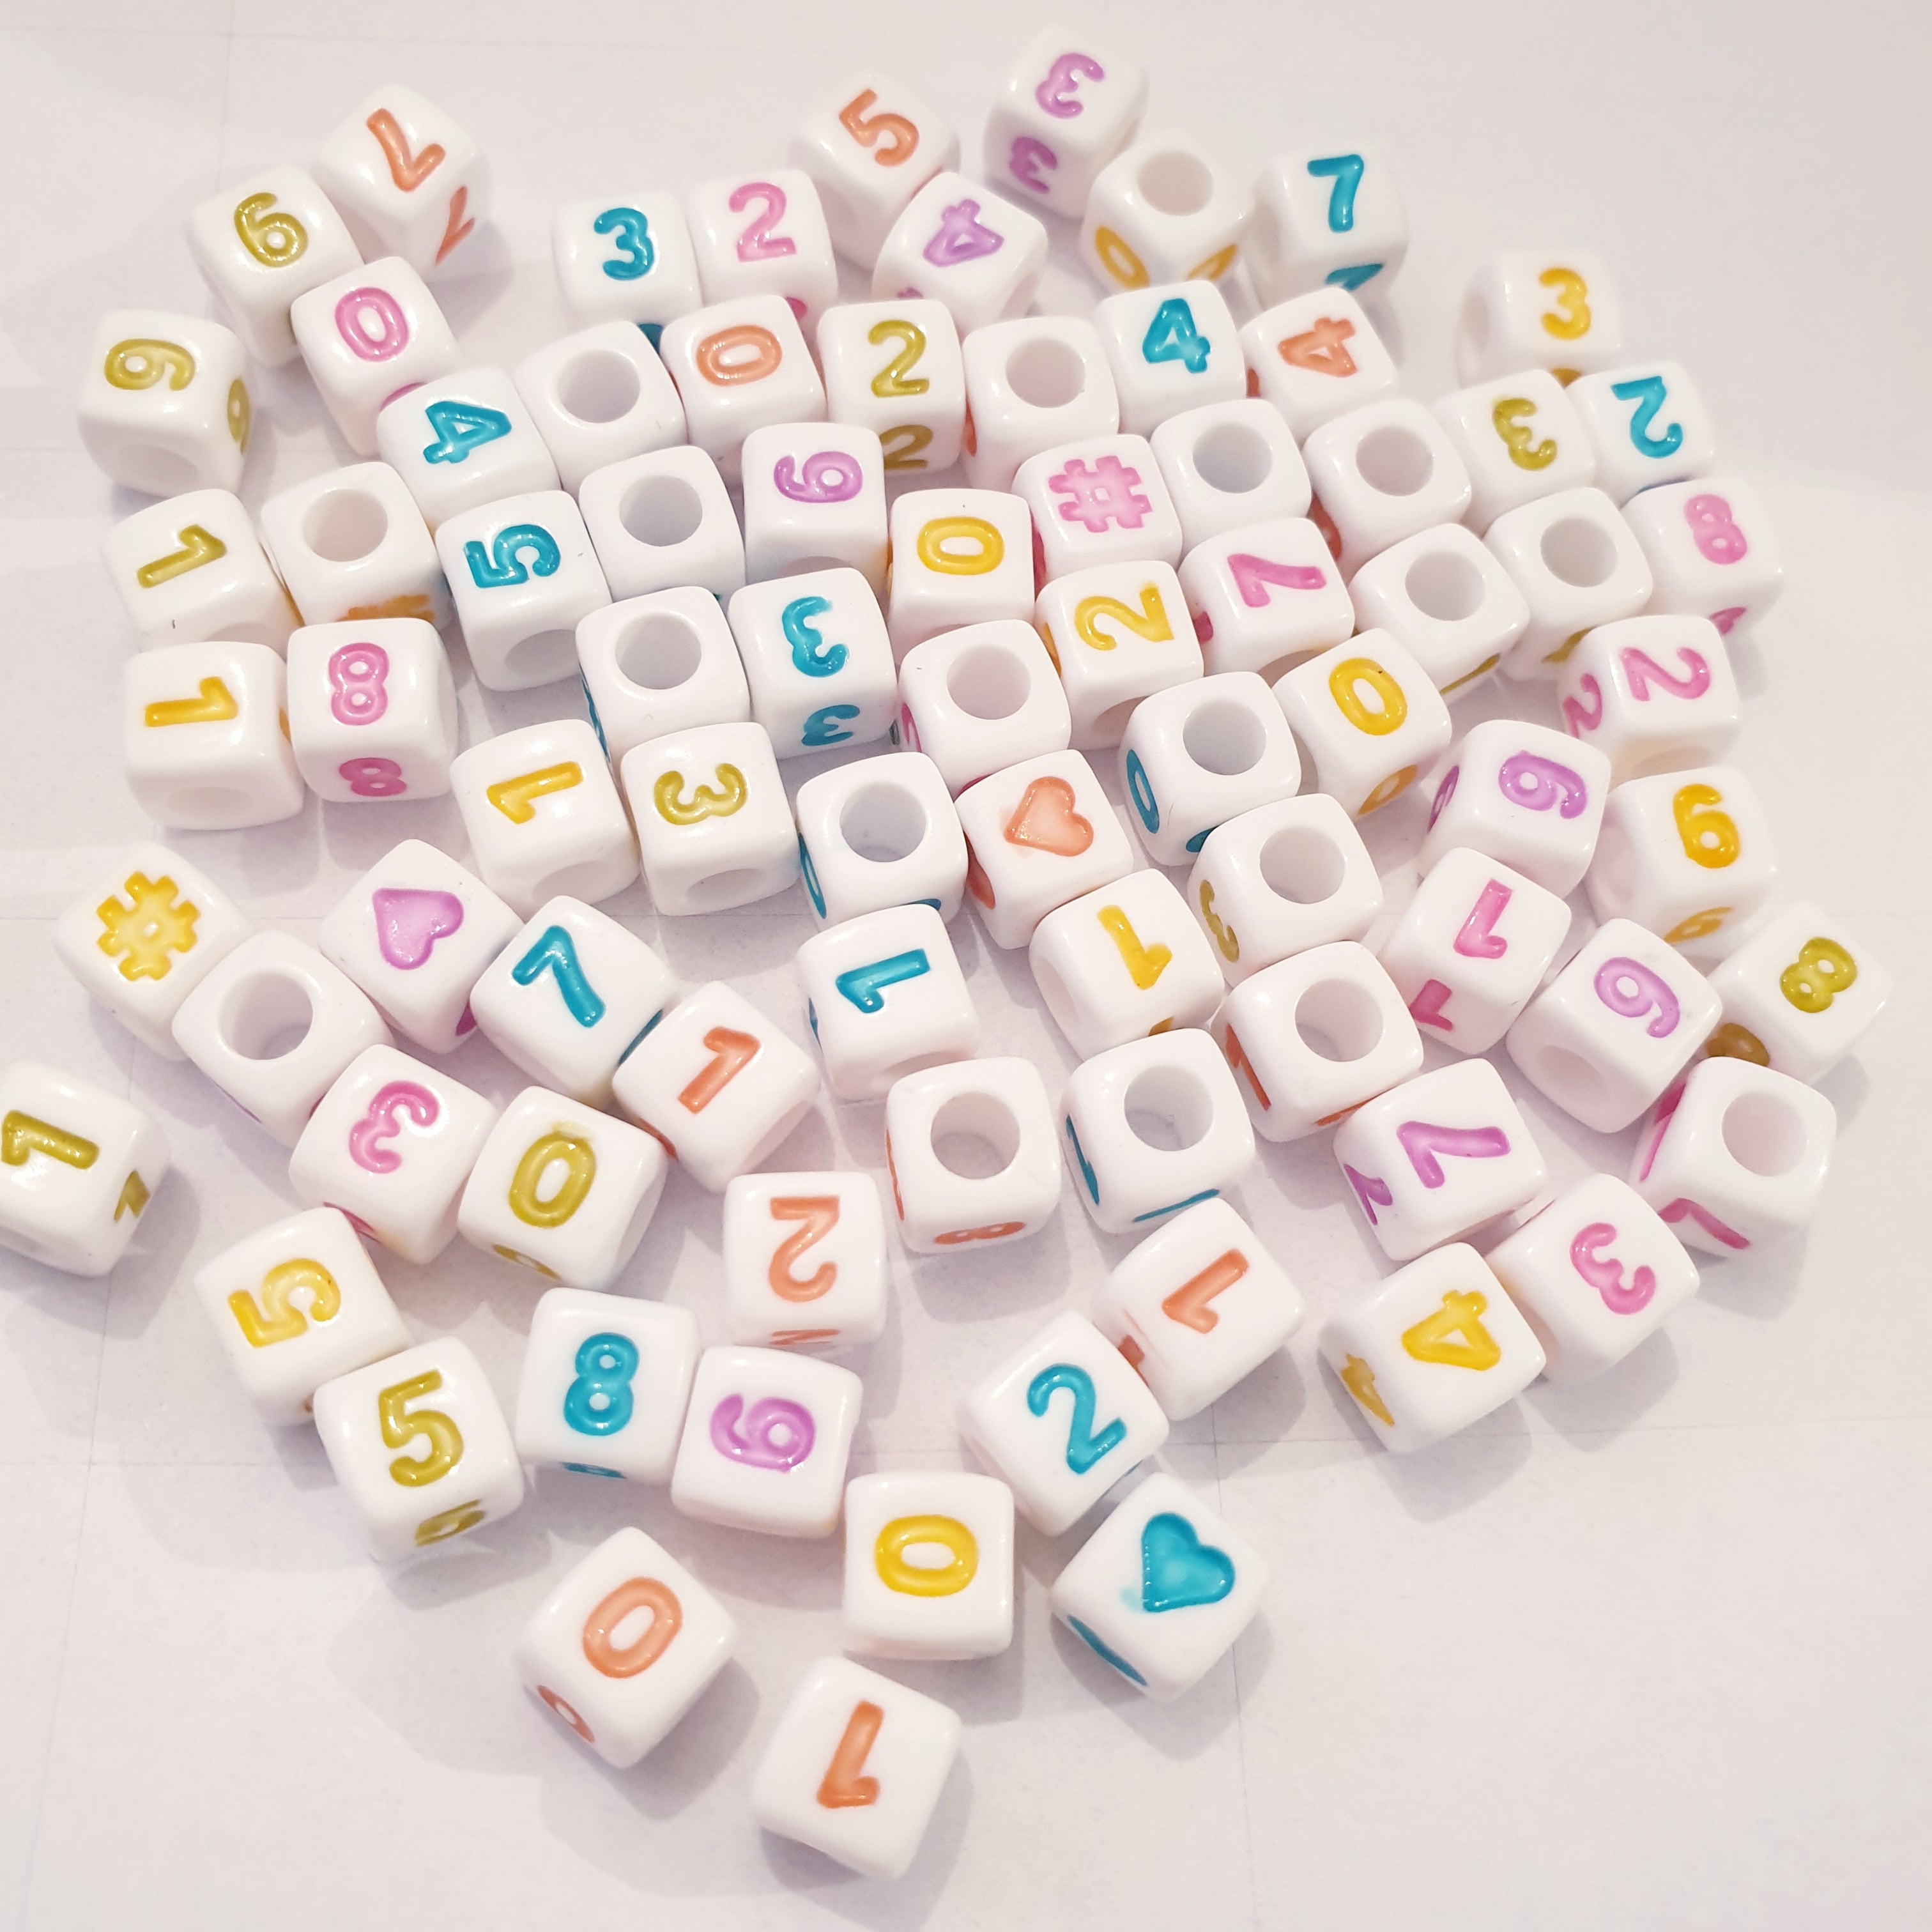 MajorCrafts 120pcs 6mm Cube Colourful Mixed Numbers Acrylic Beads with 4mm Hole Size